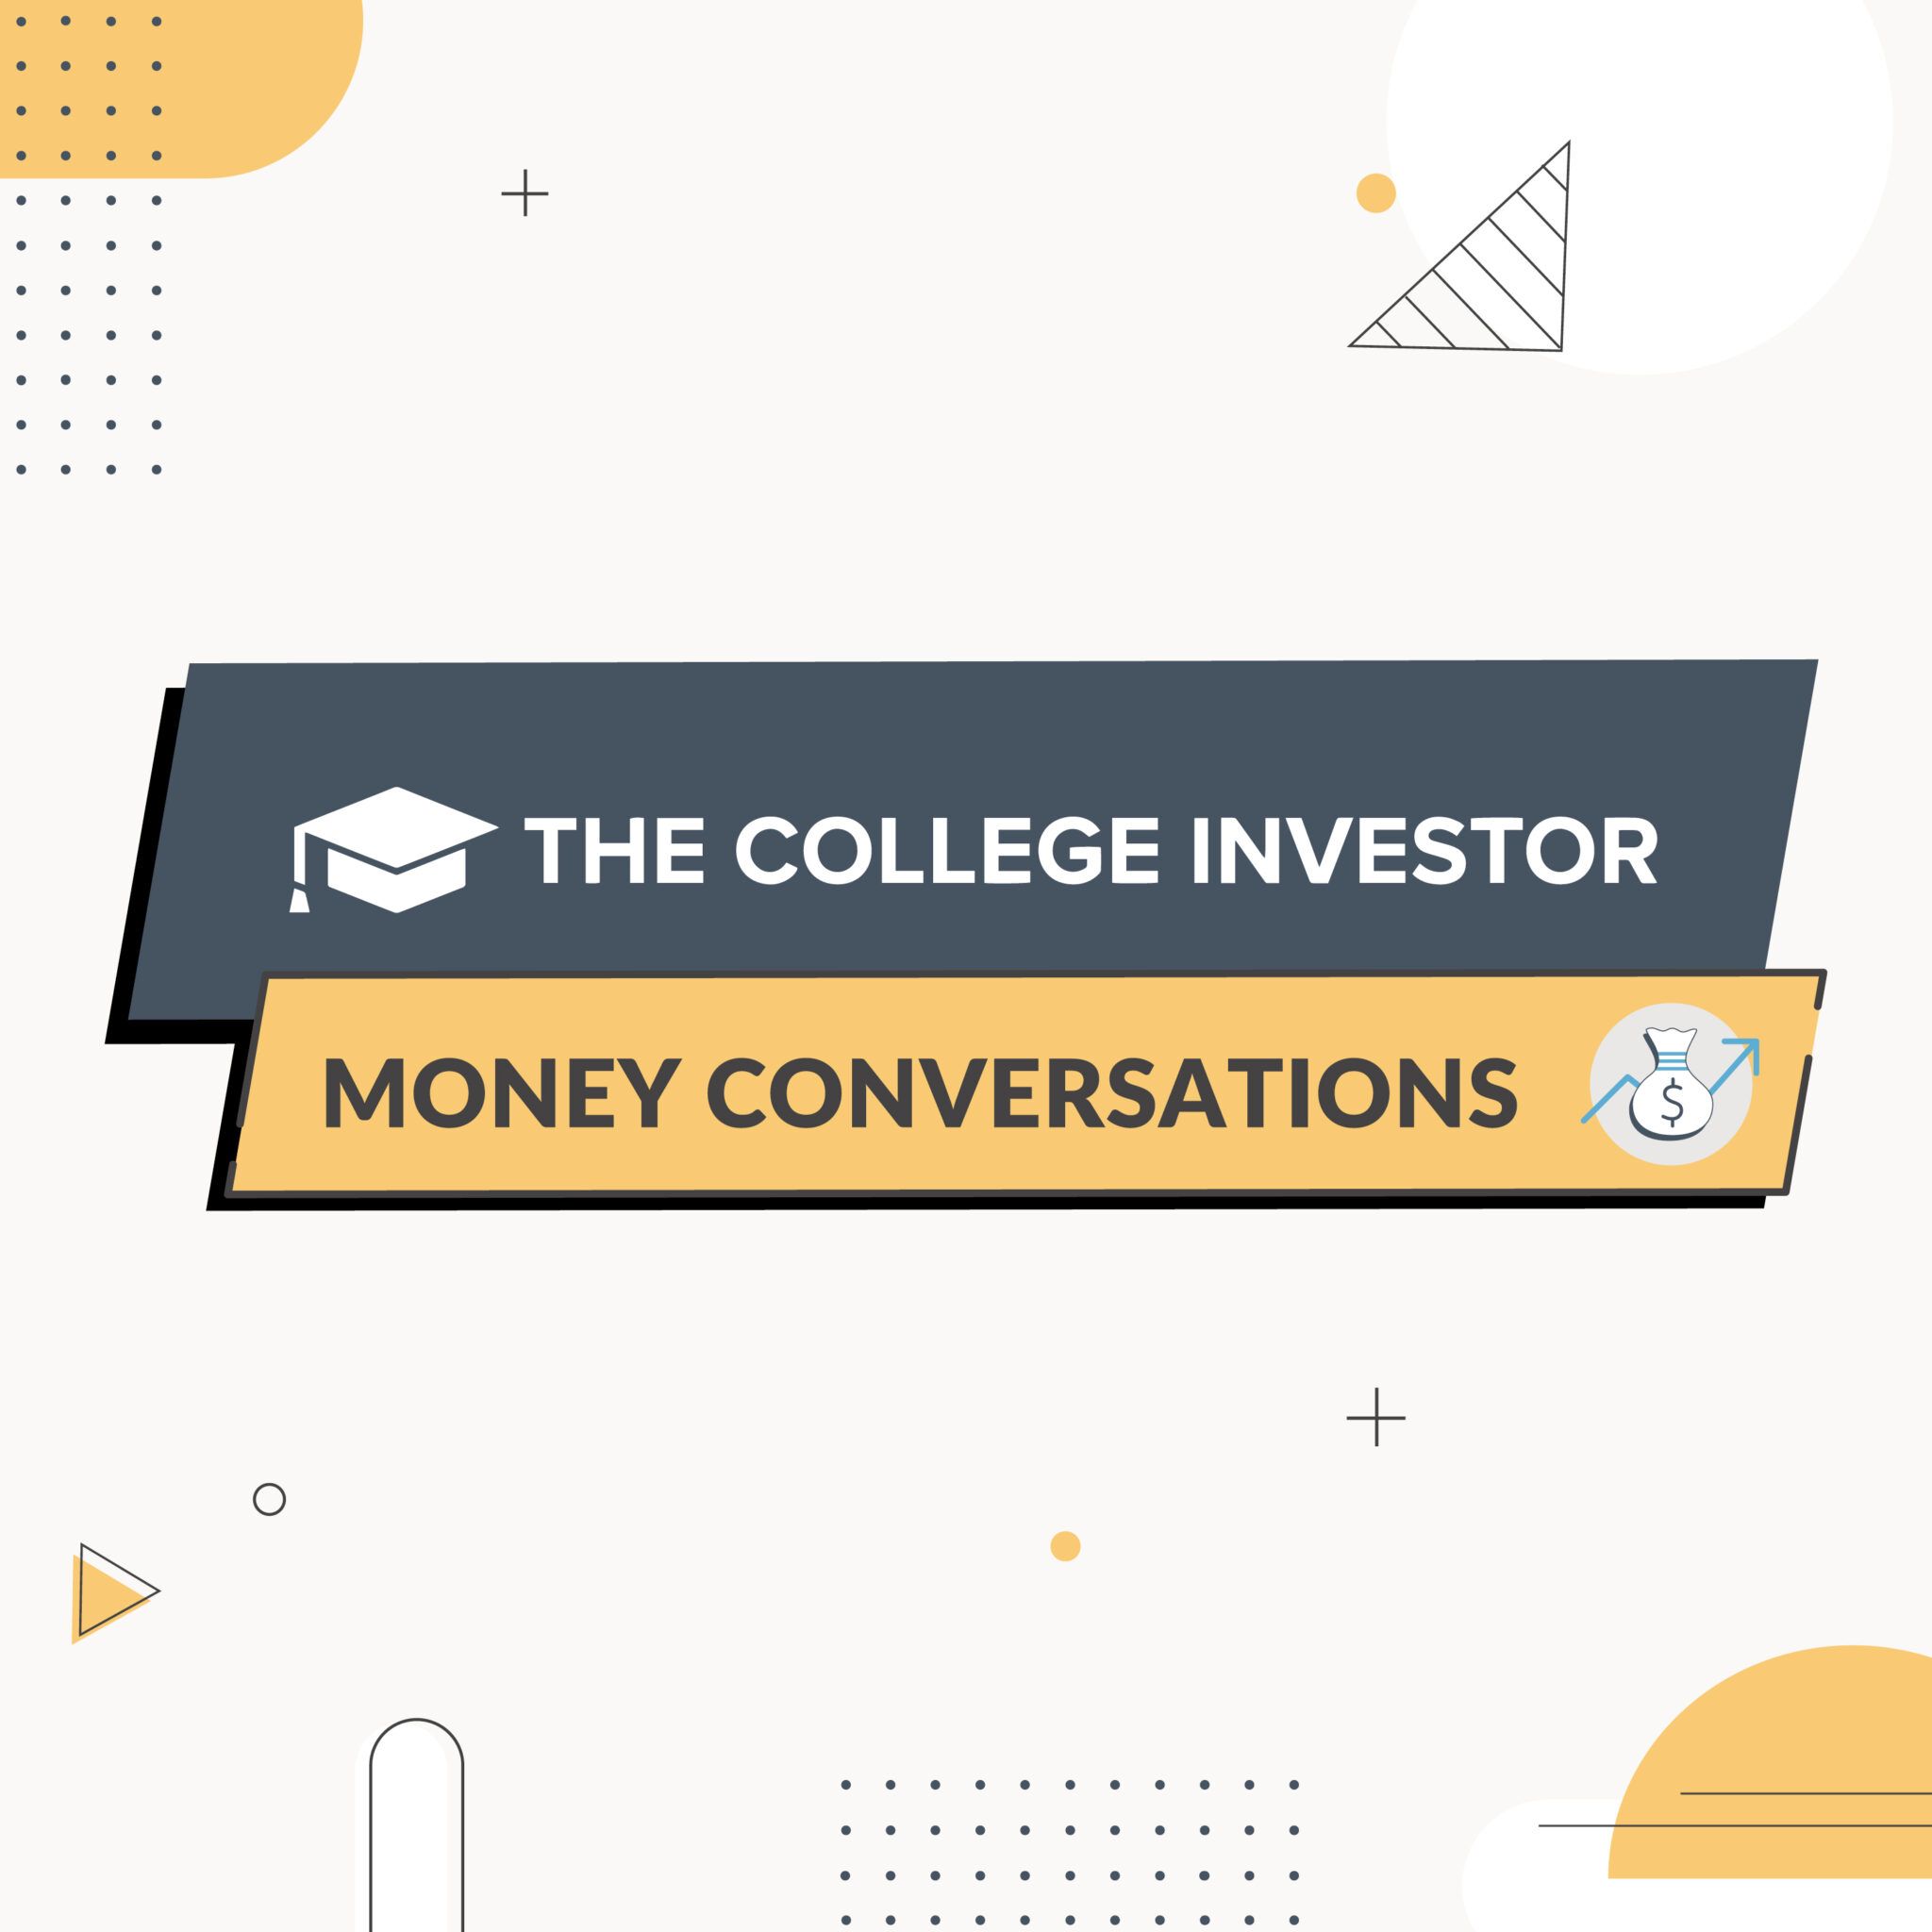 Money Conversations by The College Investor